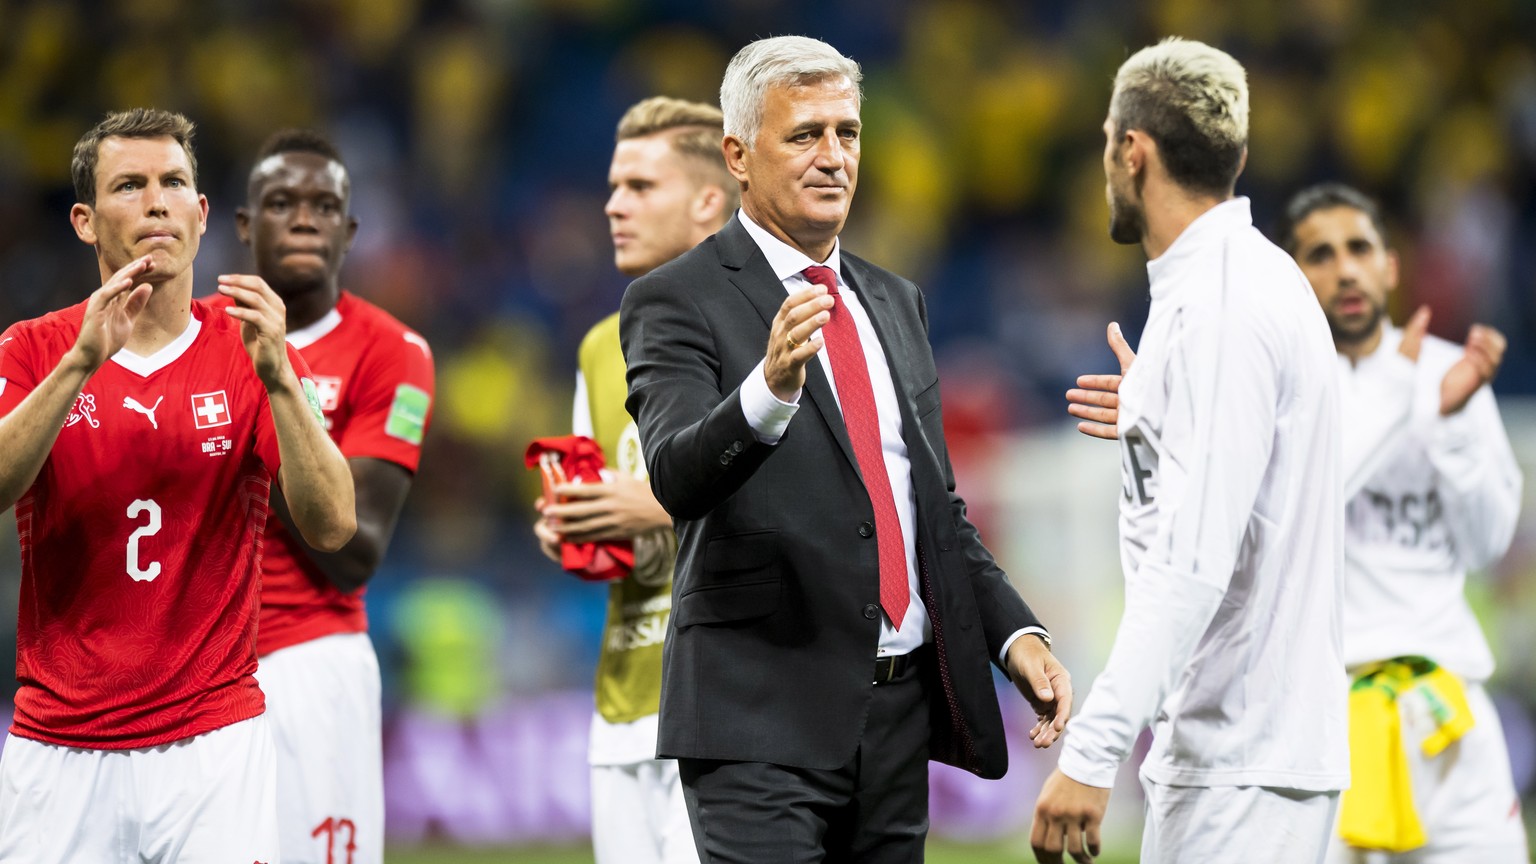 epa06817136 Switzerland's head coach Vladimir Petkovic (C) and players Stephan Lichtsteiner (L) and Valon Behrami (R) react after the FIFA World Cup 2018 group E preliminary round soccer match between ...